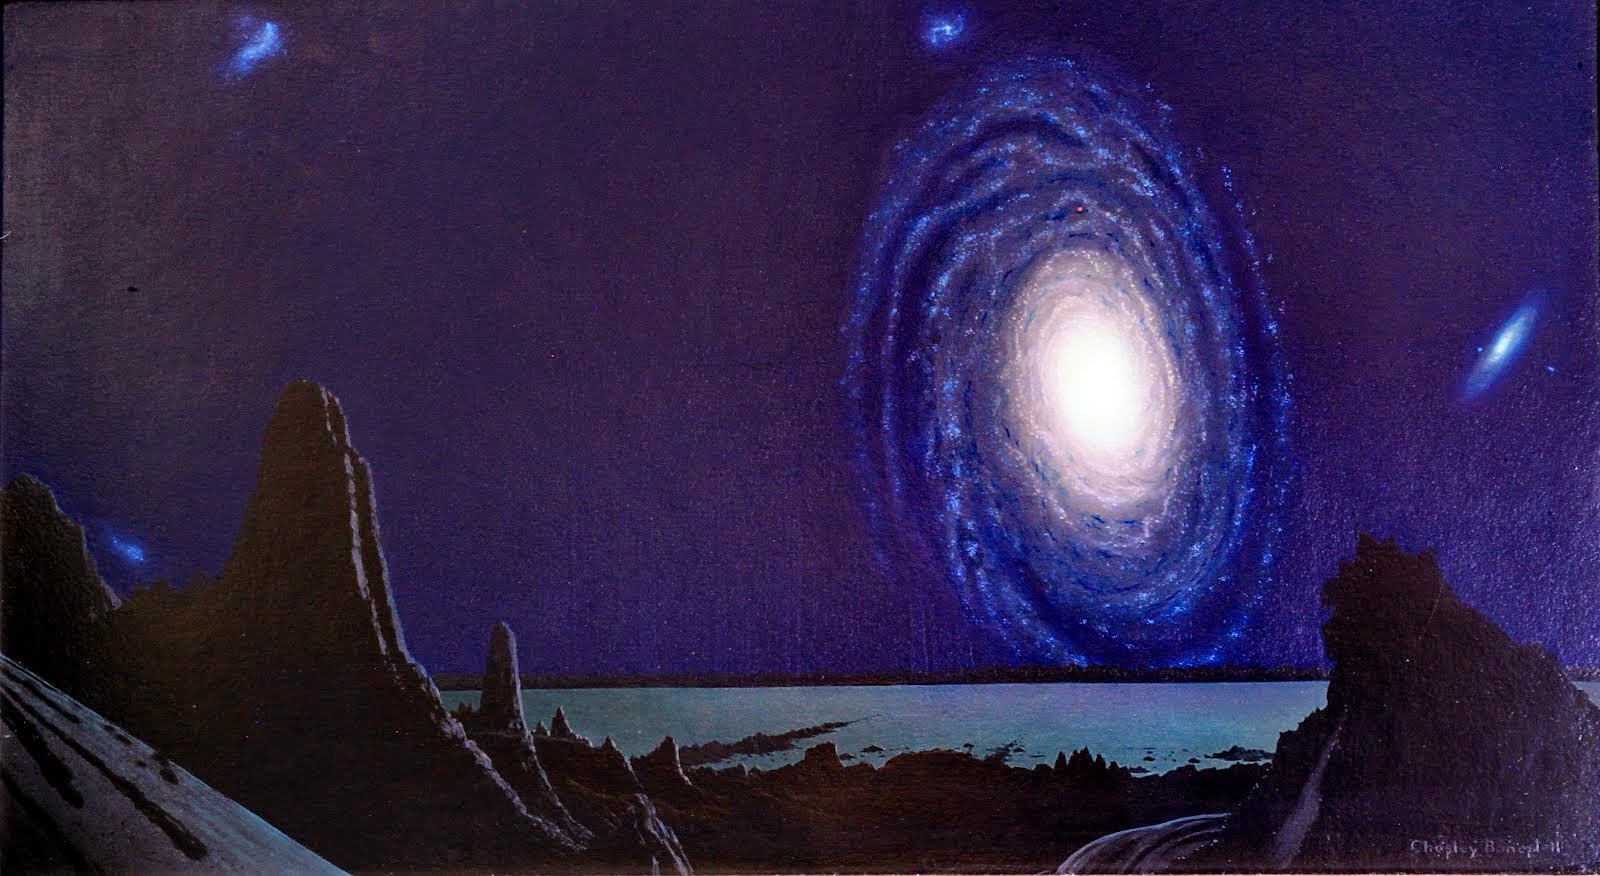 The Milky Way Galaxy from a Hypothetical Planet by Chesley Bonestell